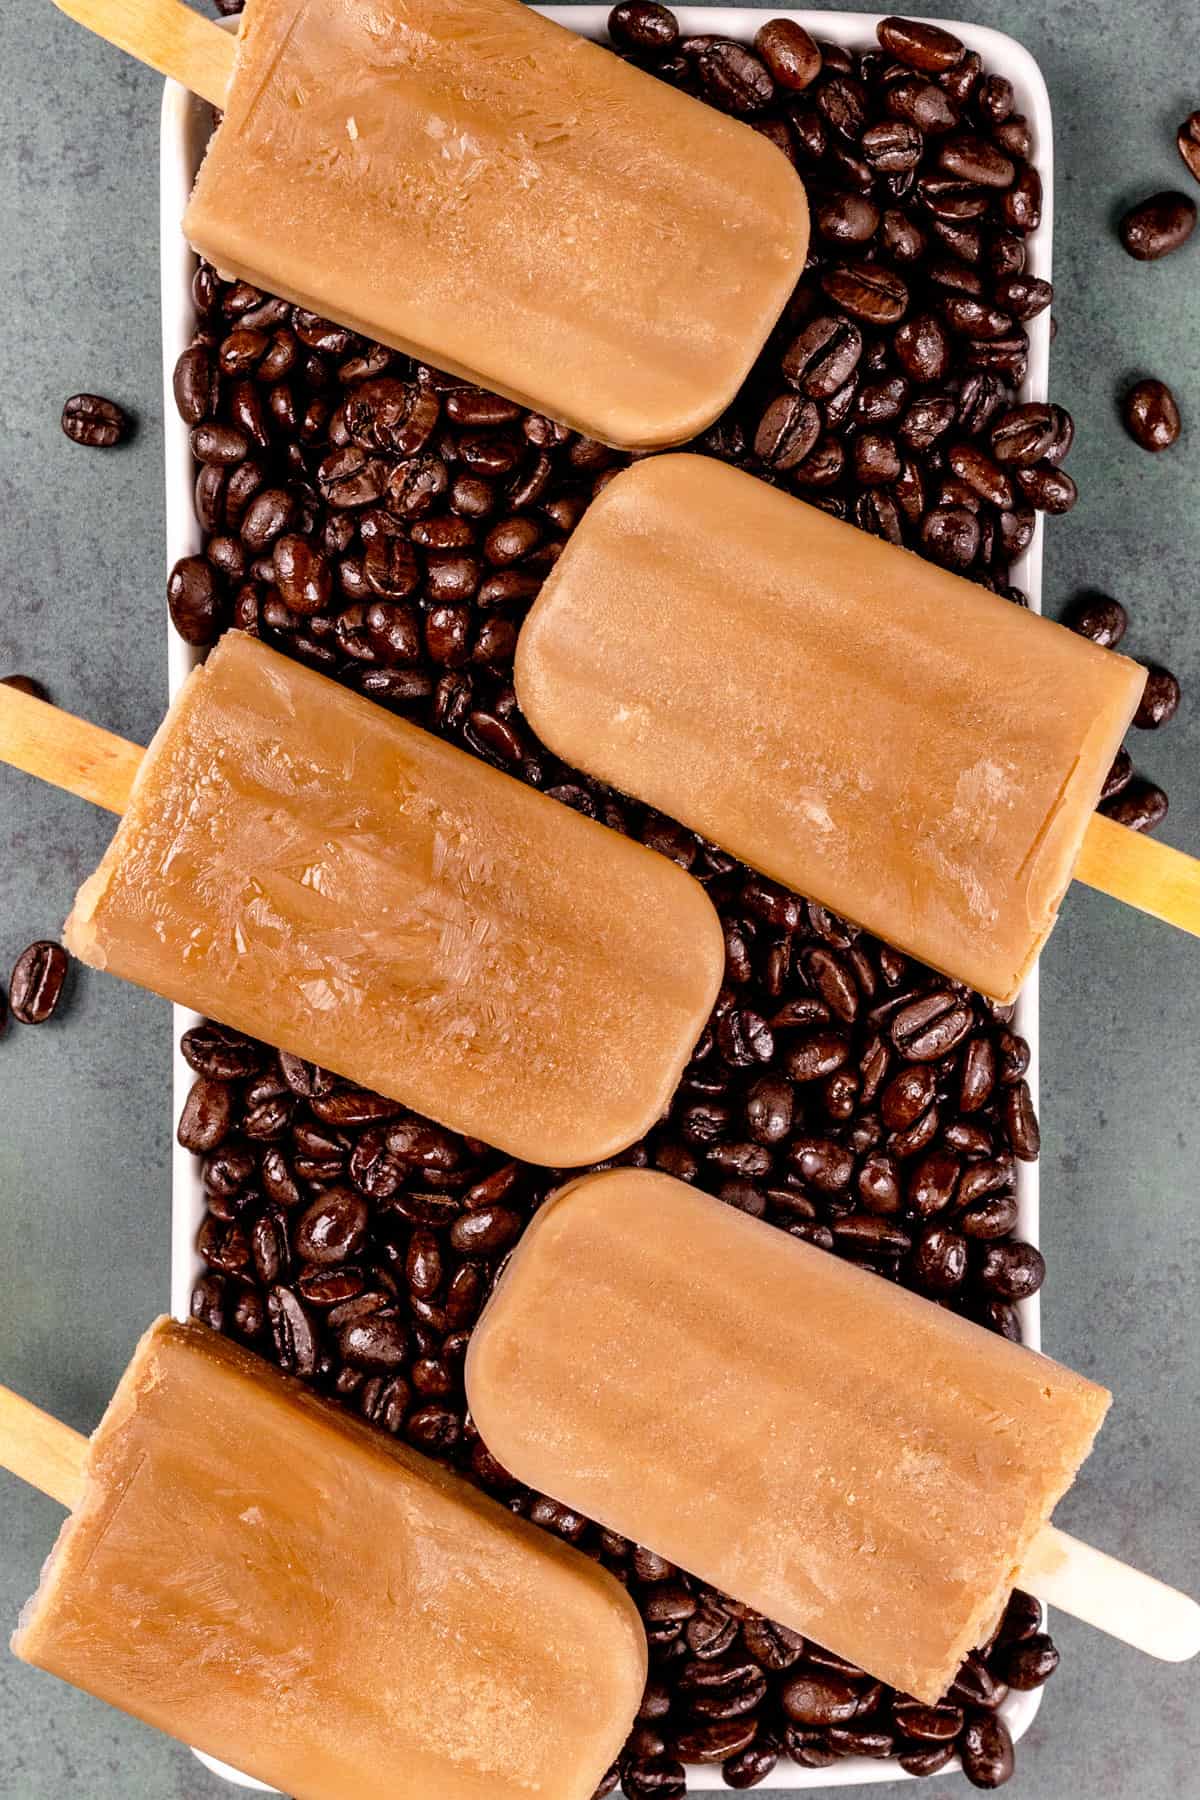 5 coffee popsicles on a long white serving tray filled with roasted coffee beans.